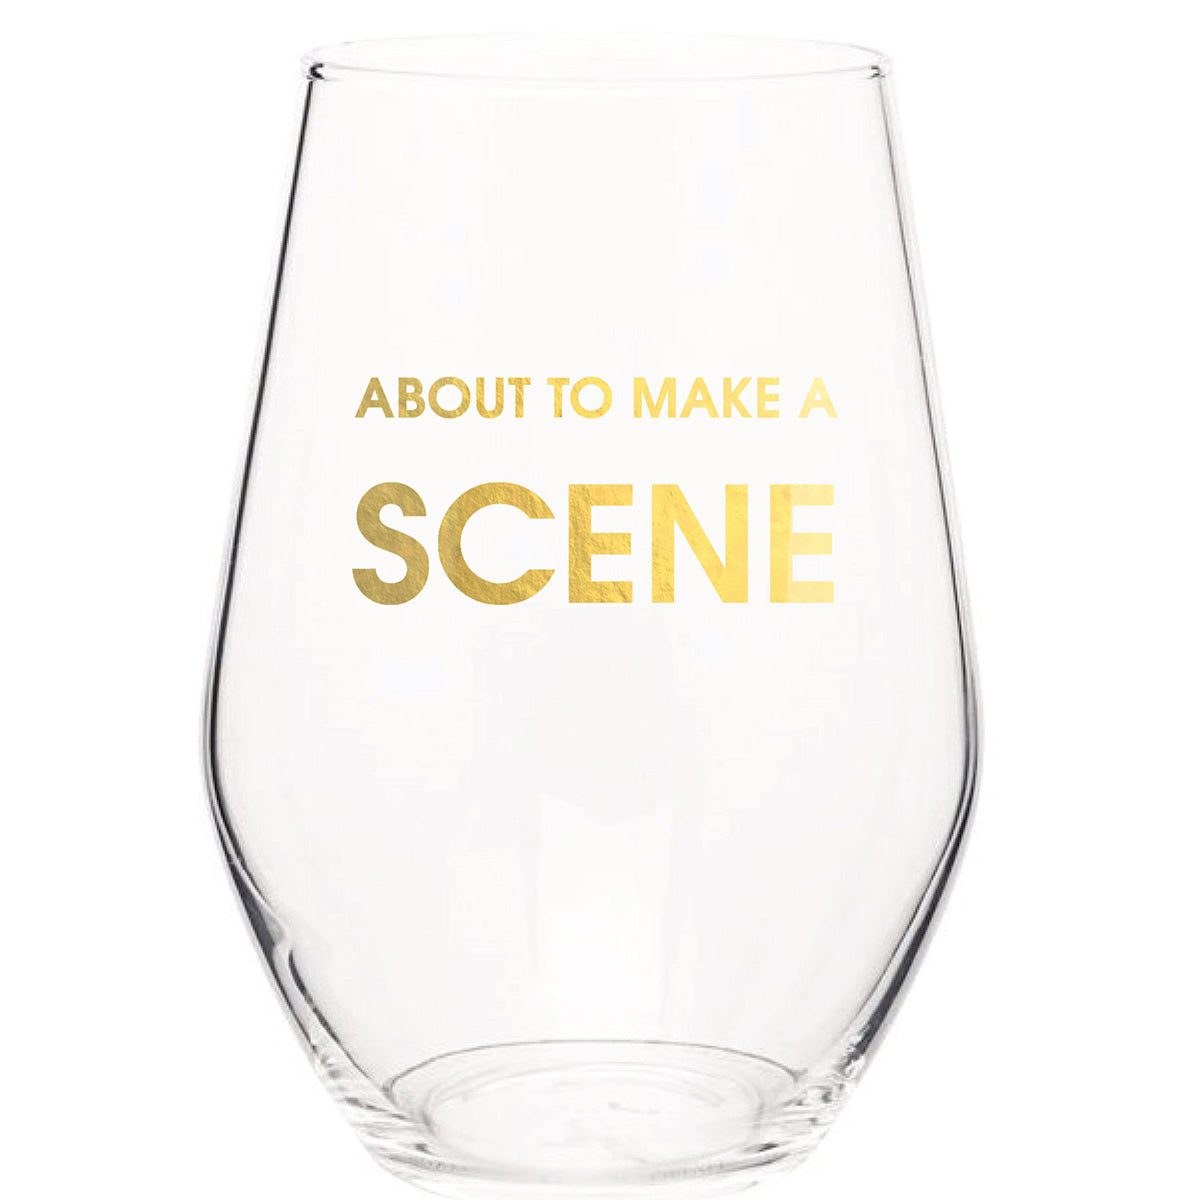 Wine Glass Case Pack - Customize your 12 pack